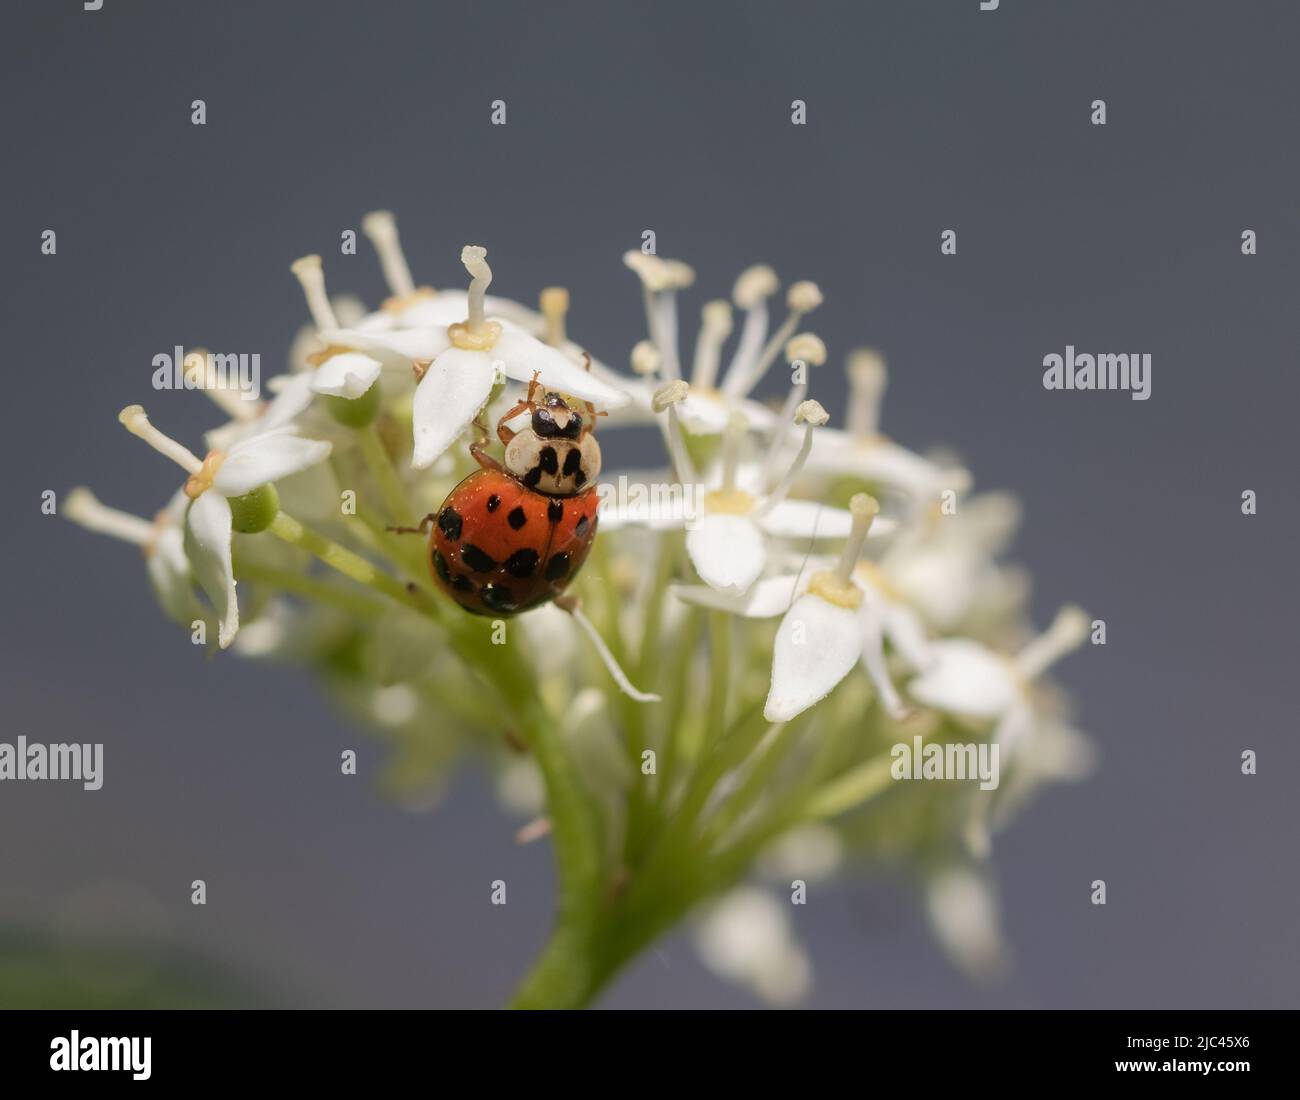 Close-up of a Lady Asian Beetle on a blooming plant Stock Photo